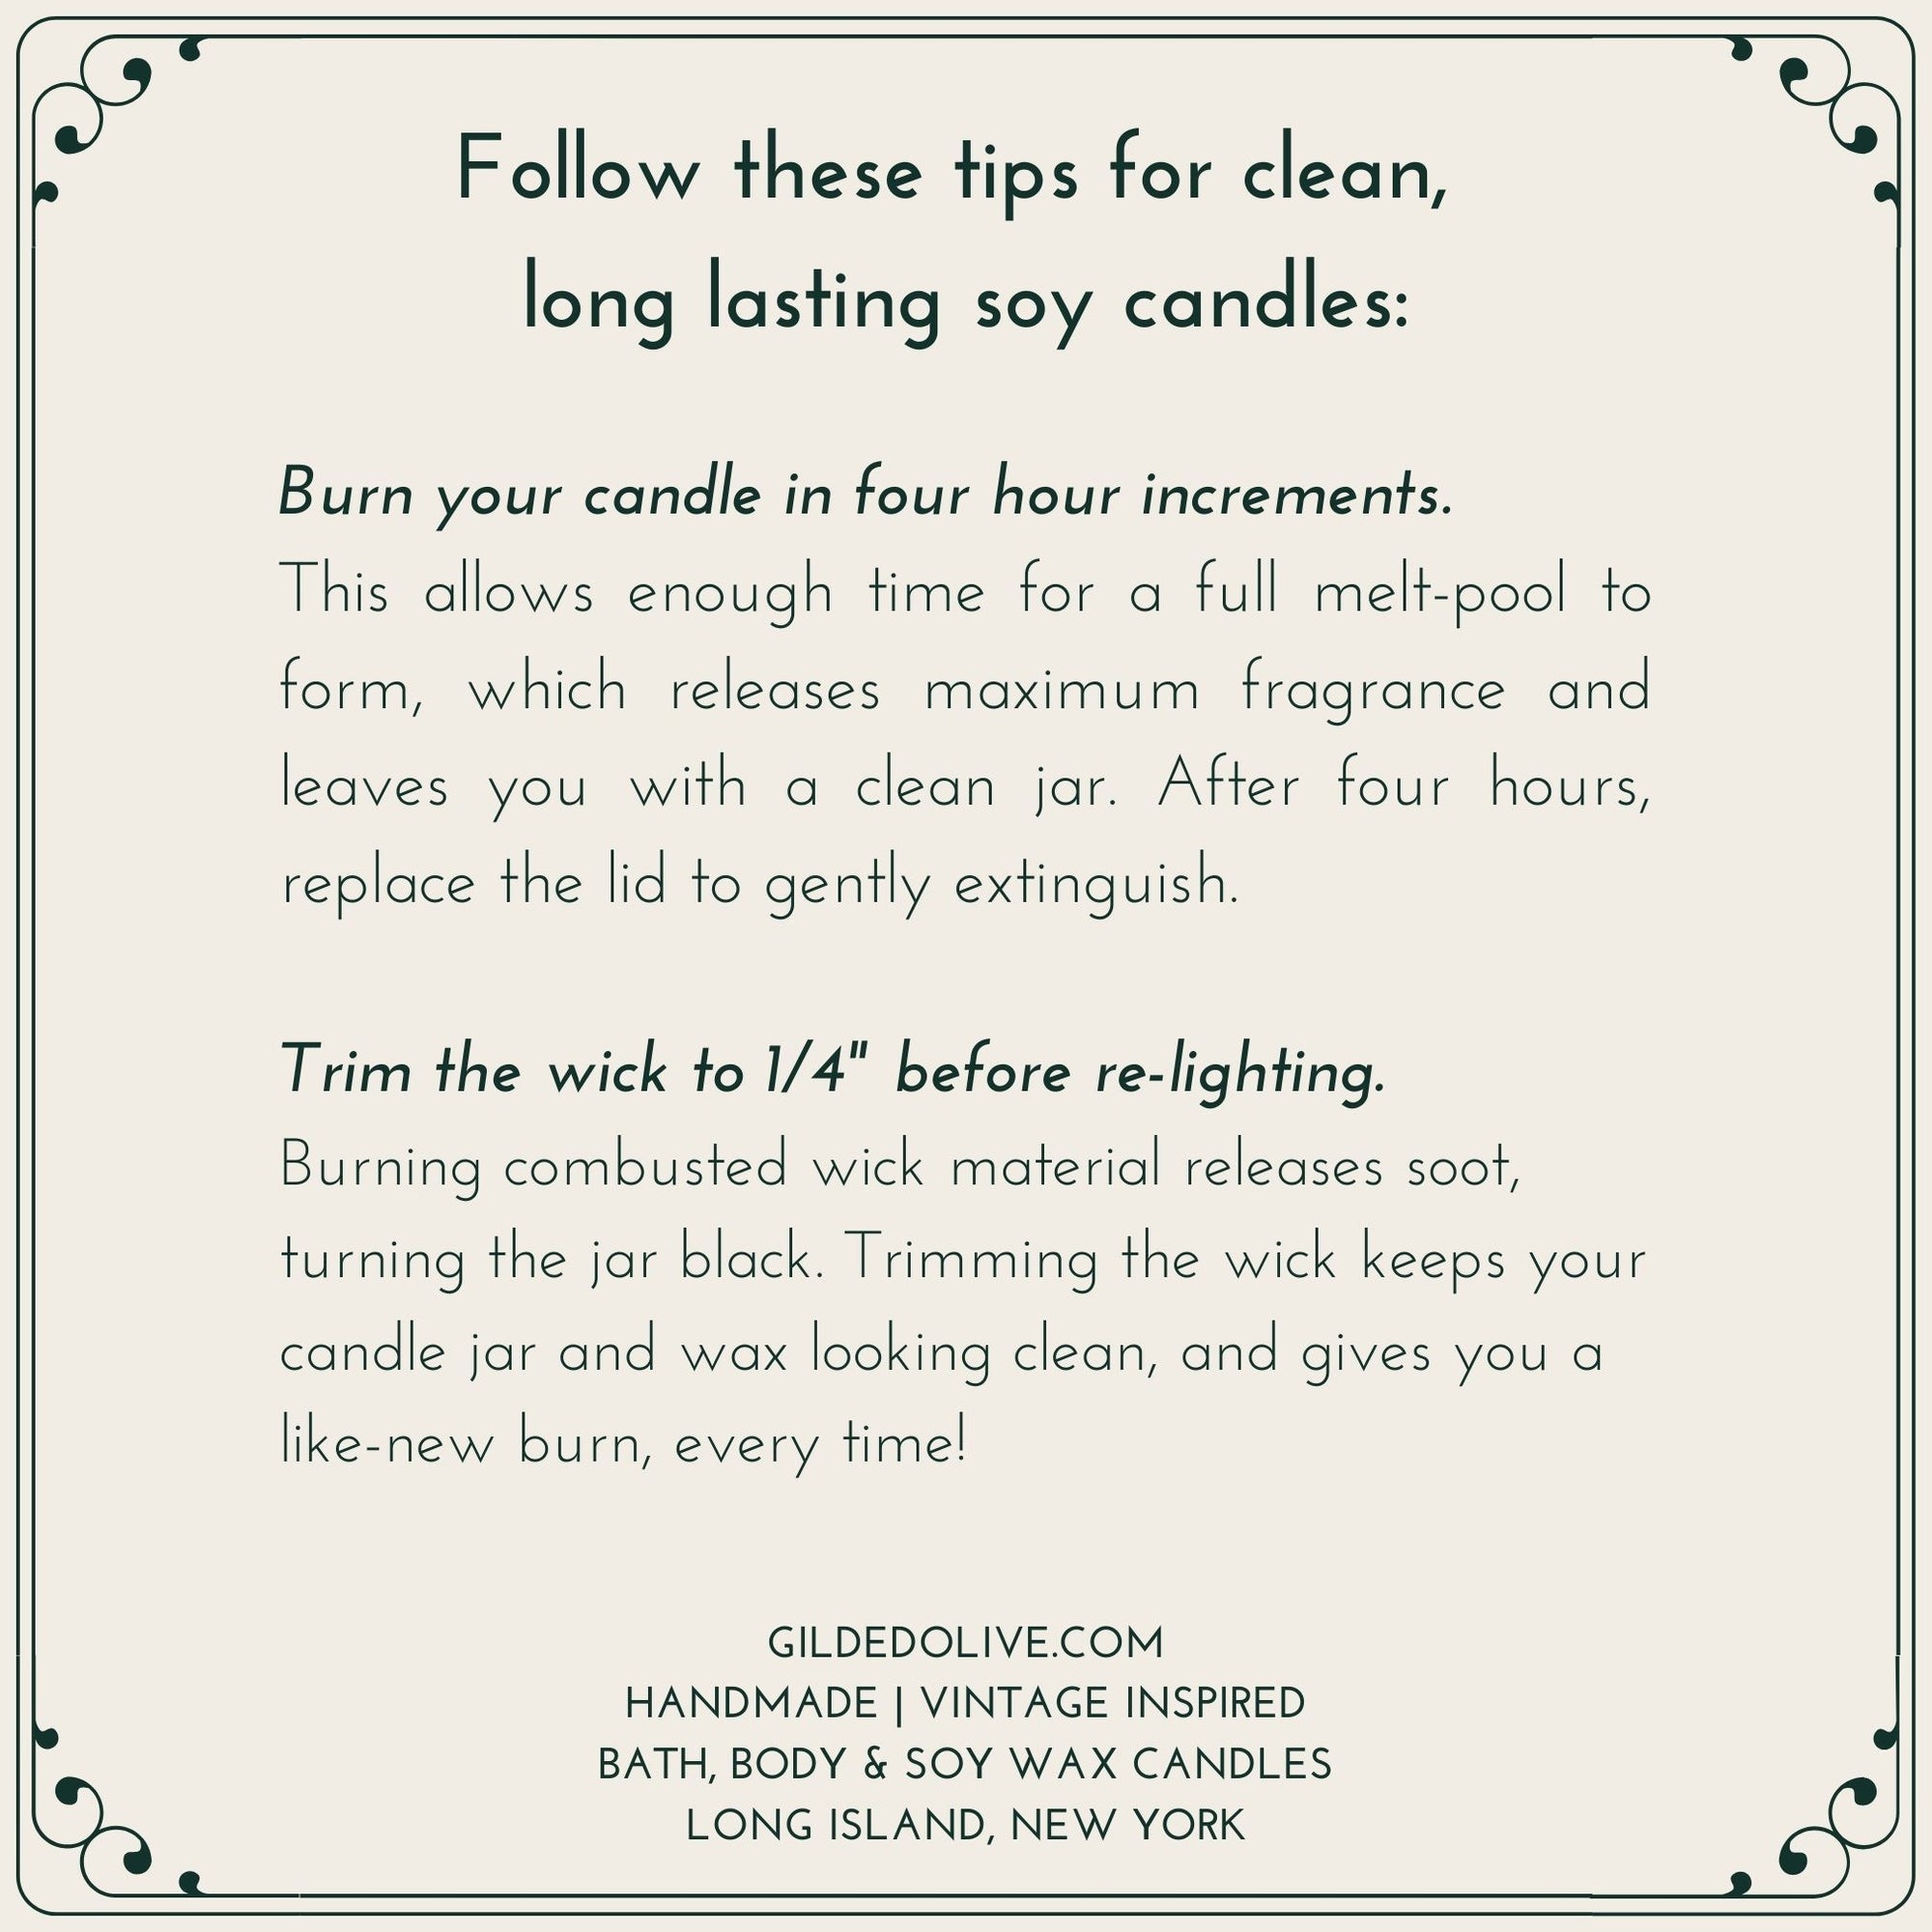 Candle Care Tips | Gilded Olive Apothecary